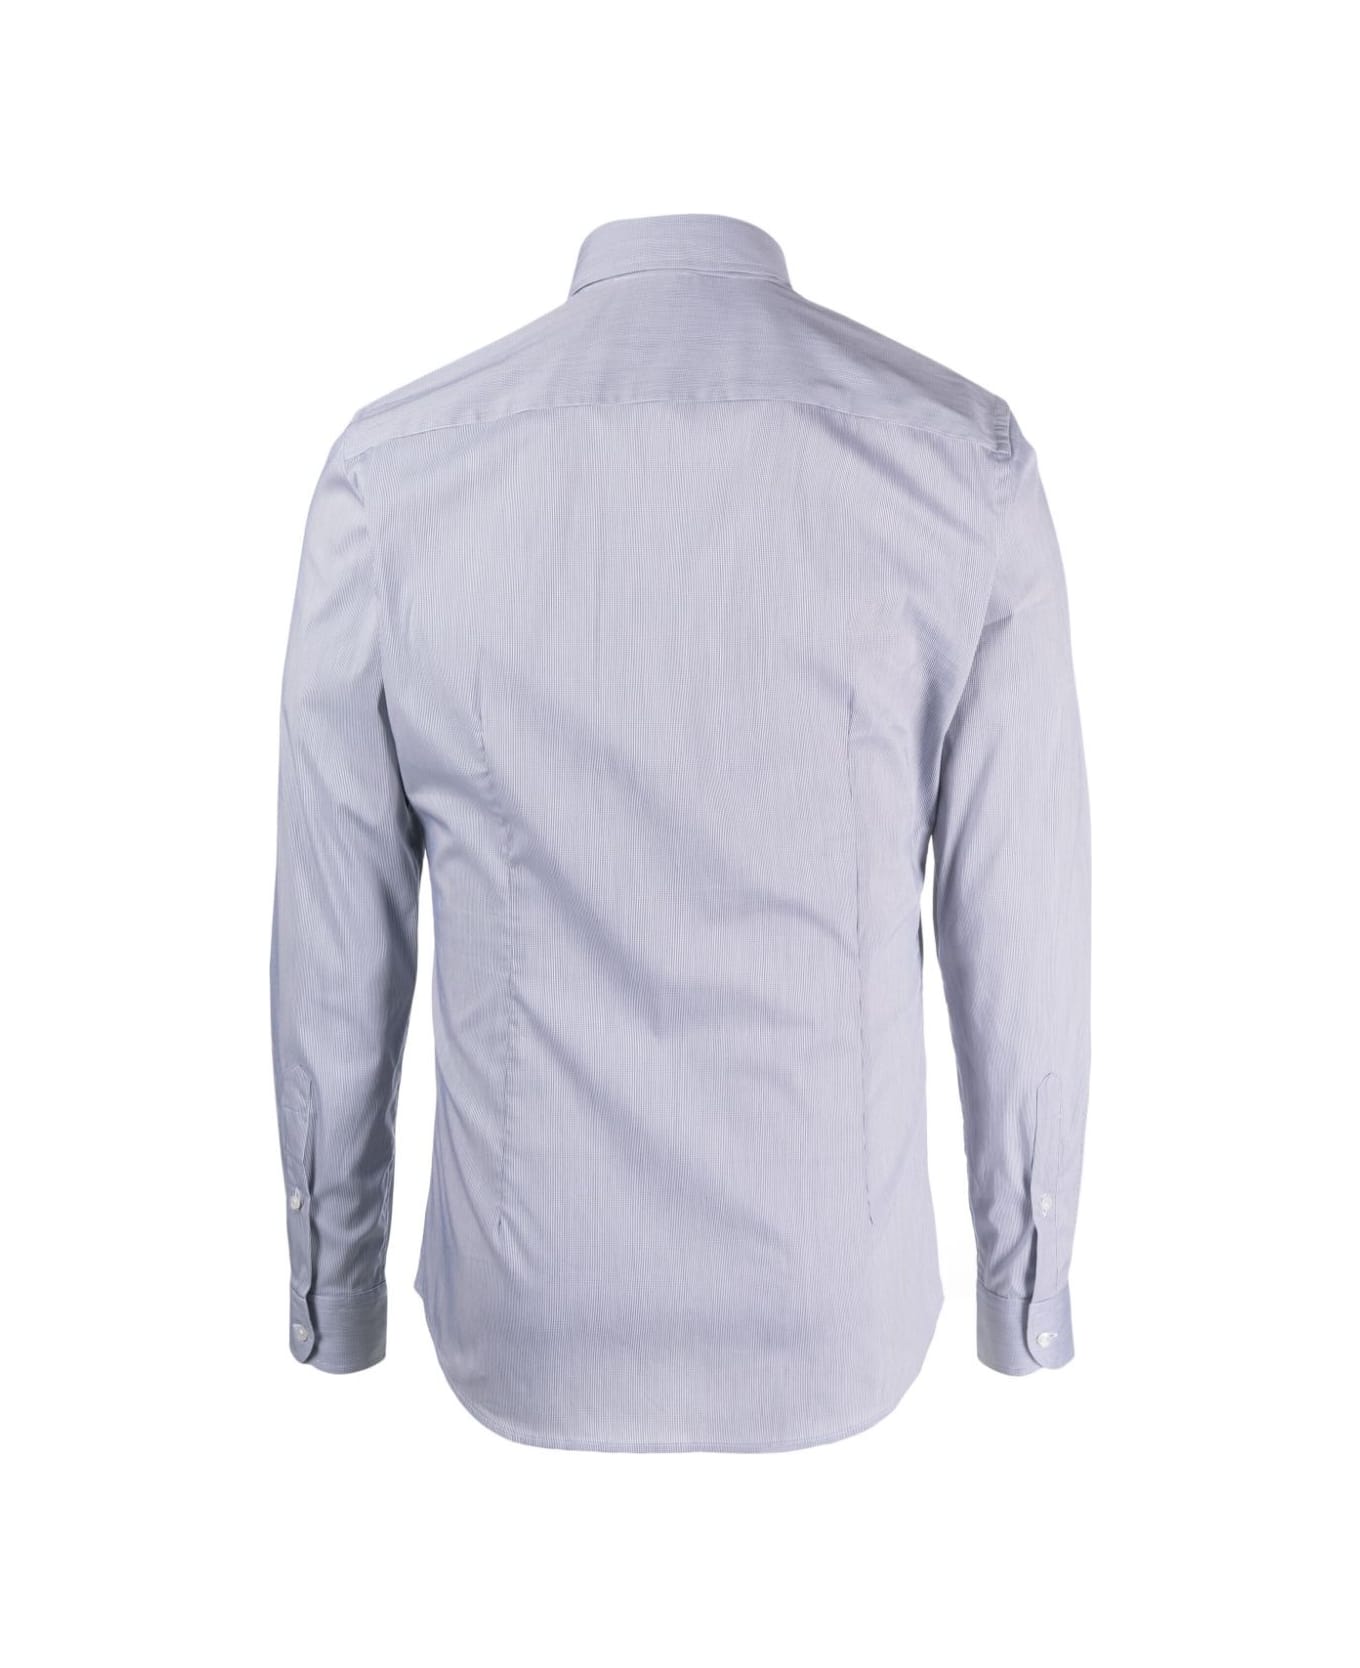 Fay New Button Down Stretch Popeline Microchecked Shirt - White